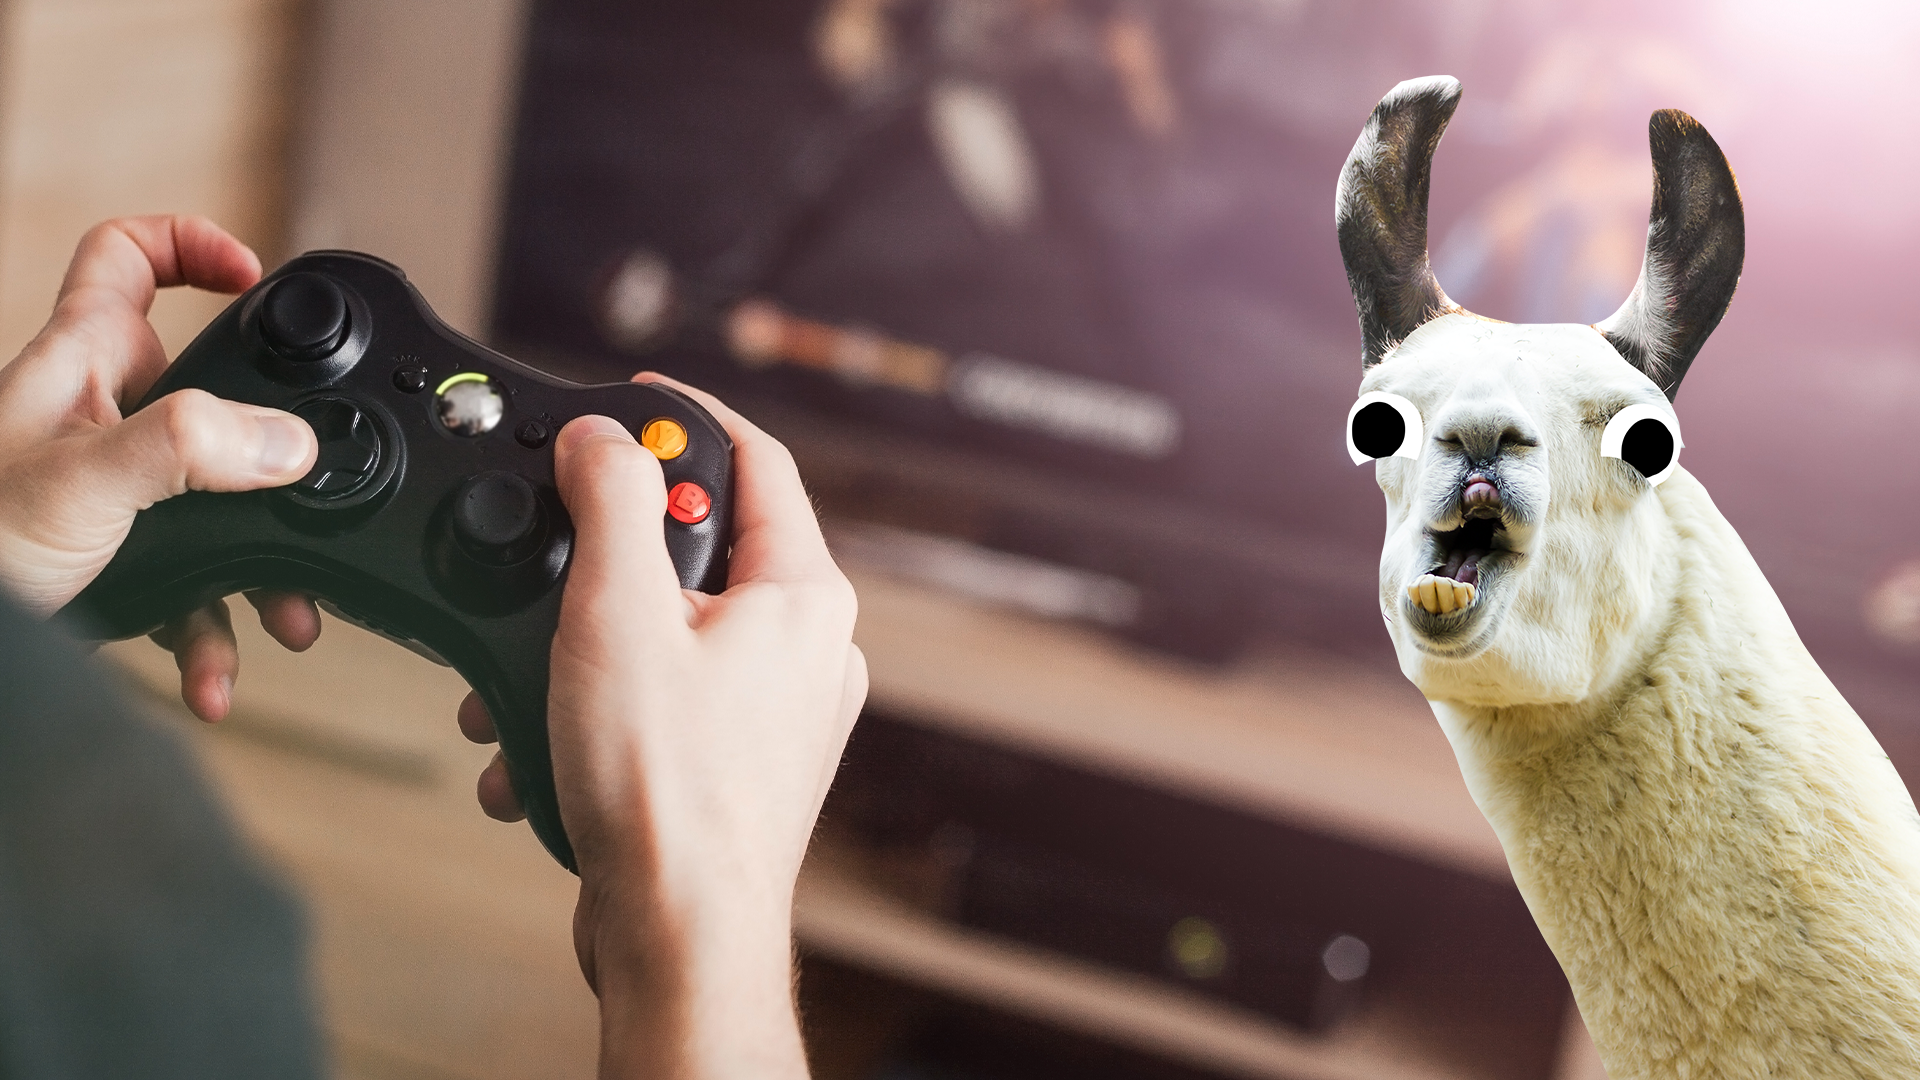 Someone gaming with derpy llama